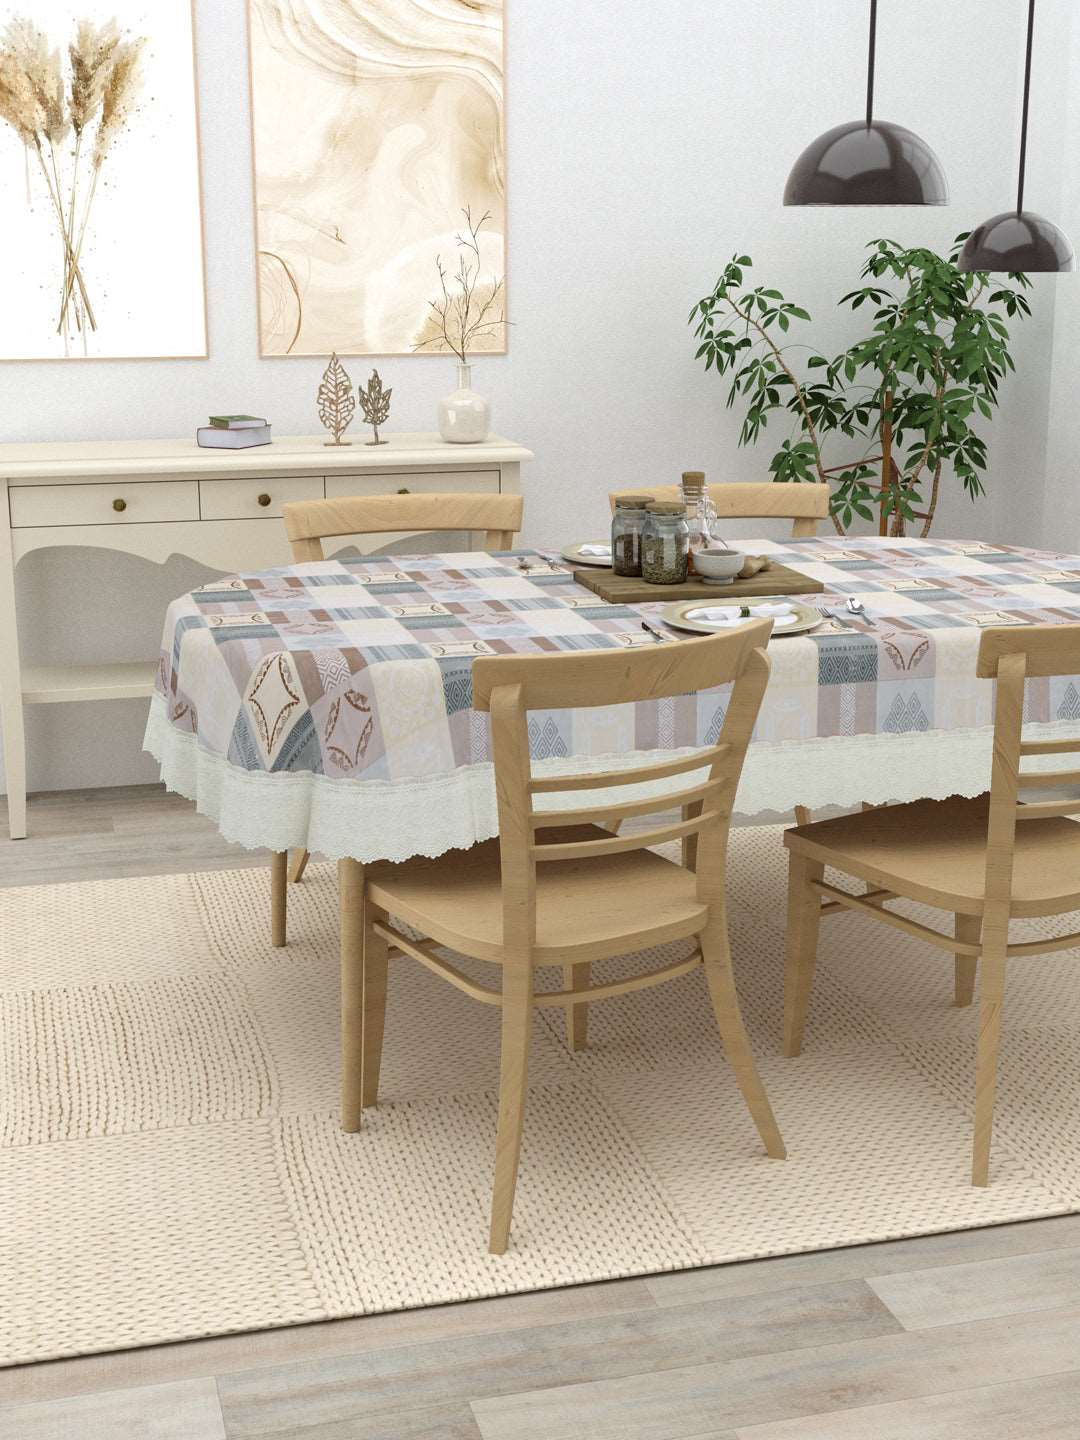 6 Seater Oval Dining Table Cover; 60x90 Inches; Material - PVC; Anti Slip; Light Color Checks